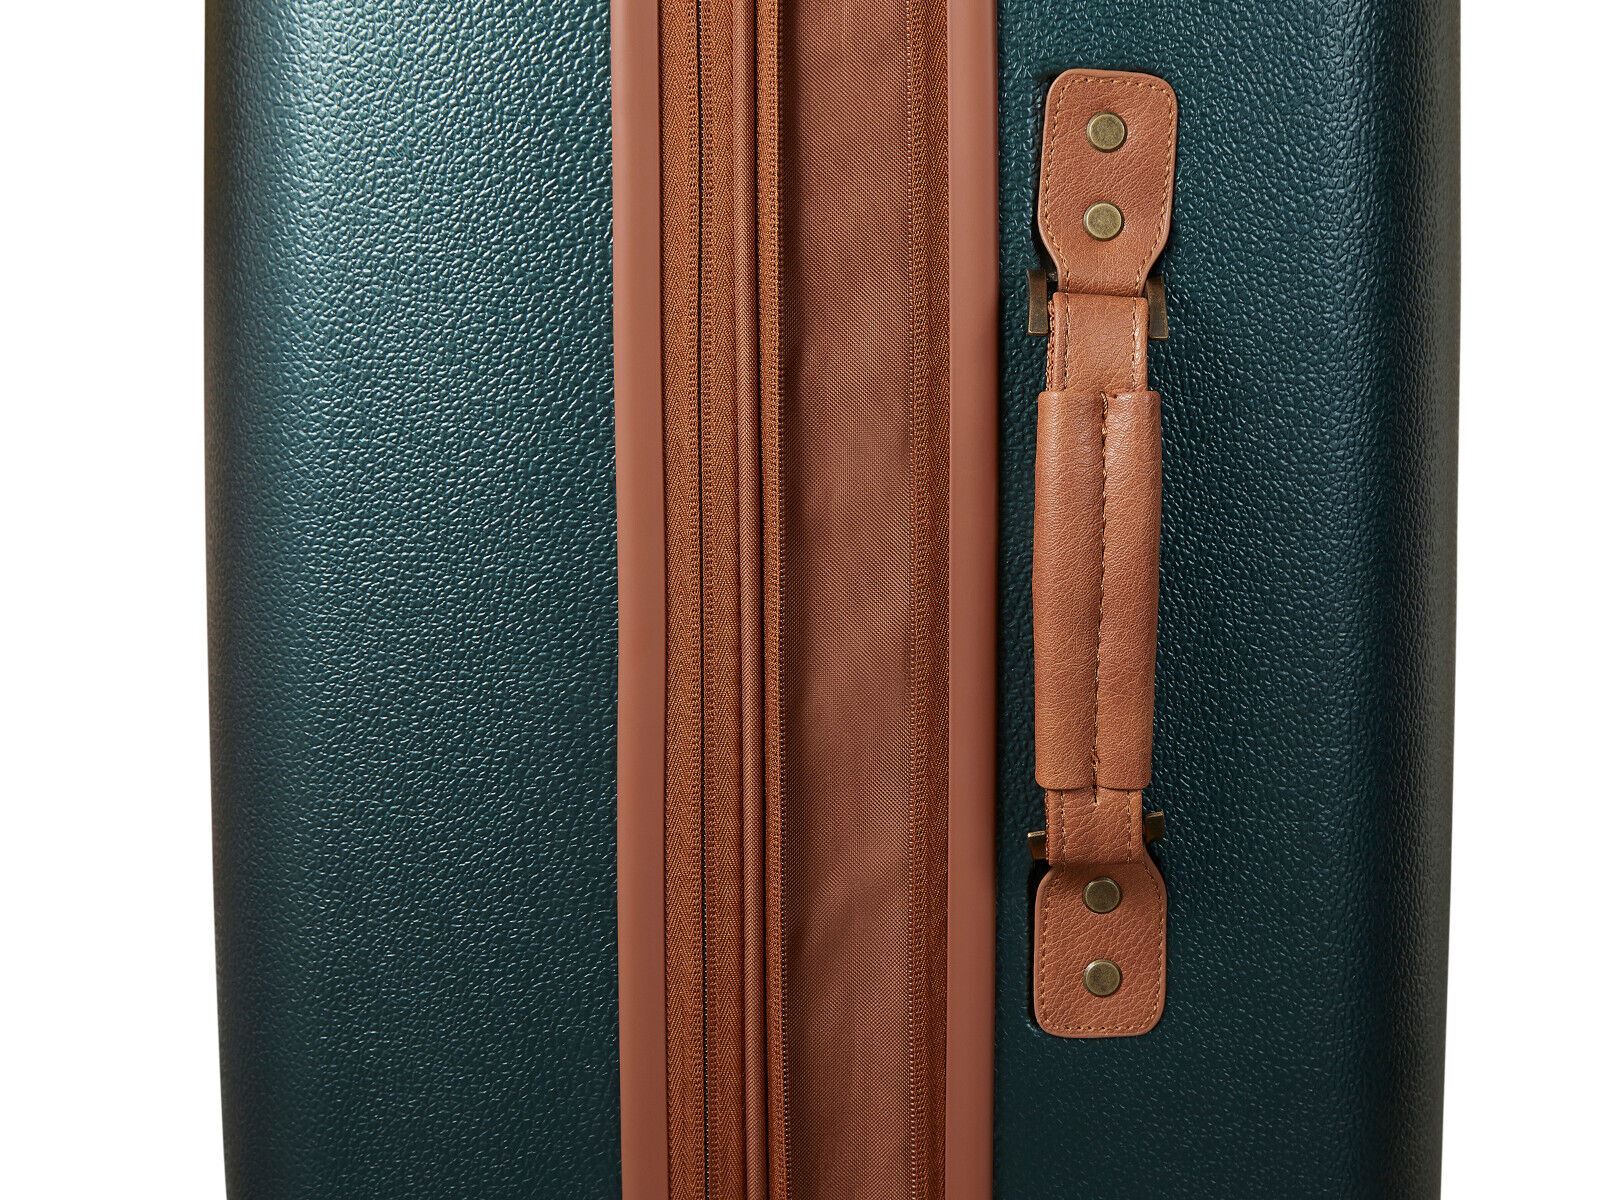 Anderson Large Hard Shell Suitcase in Green